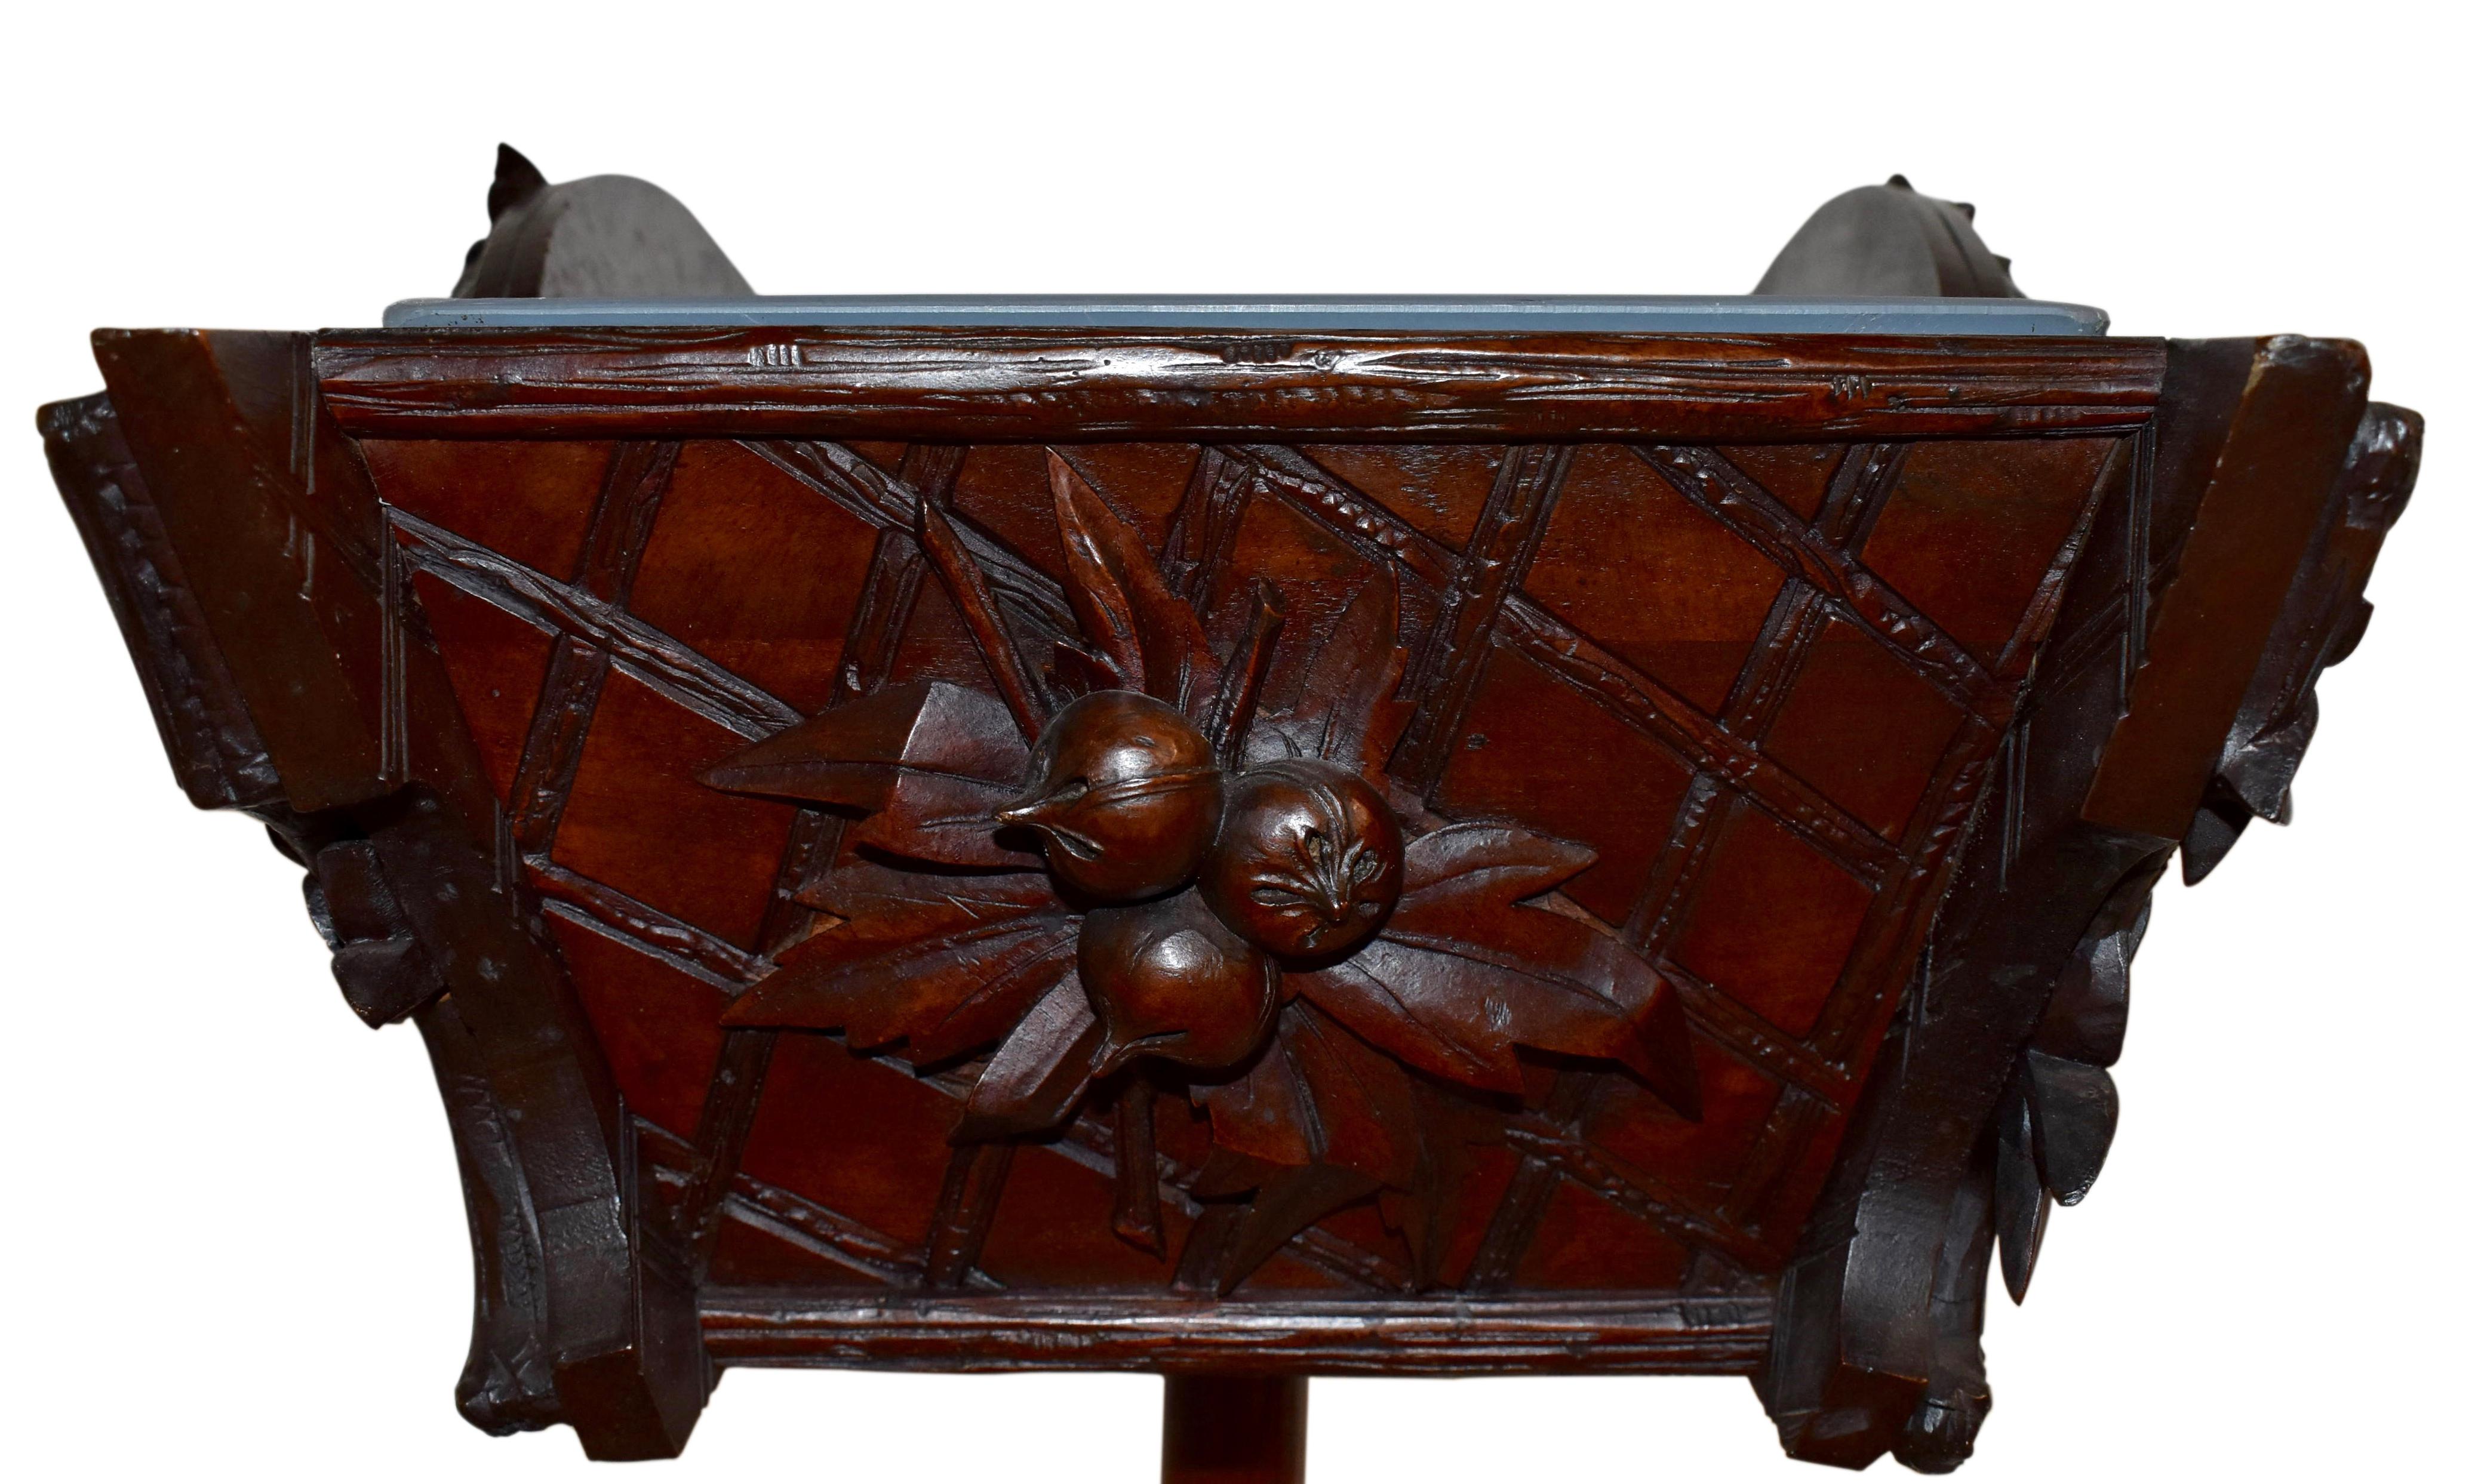 19th Century Swiss Black Forest Carved Wooden Planter Box / Jardinière, circa 1895 For Sale